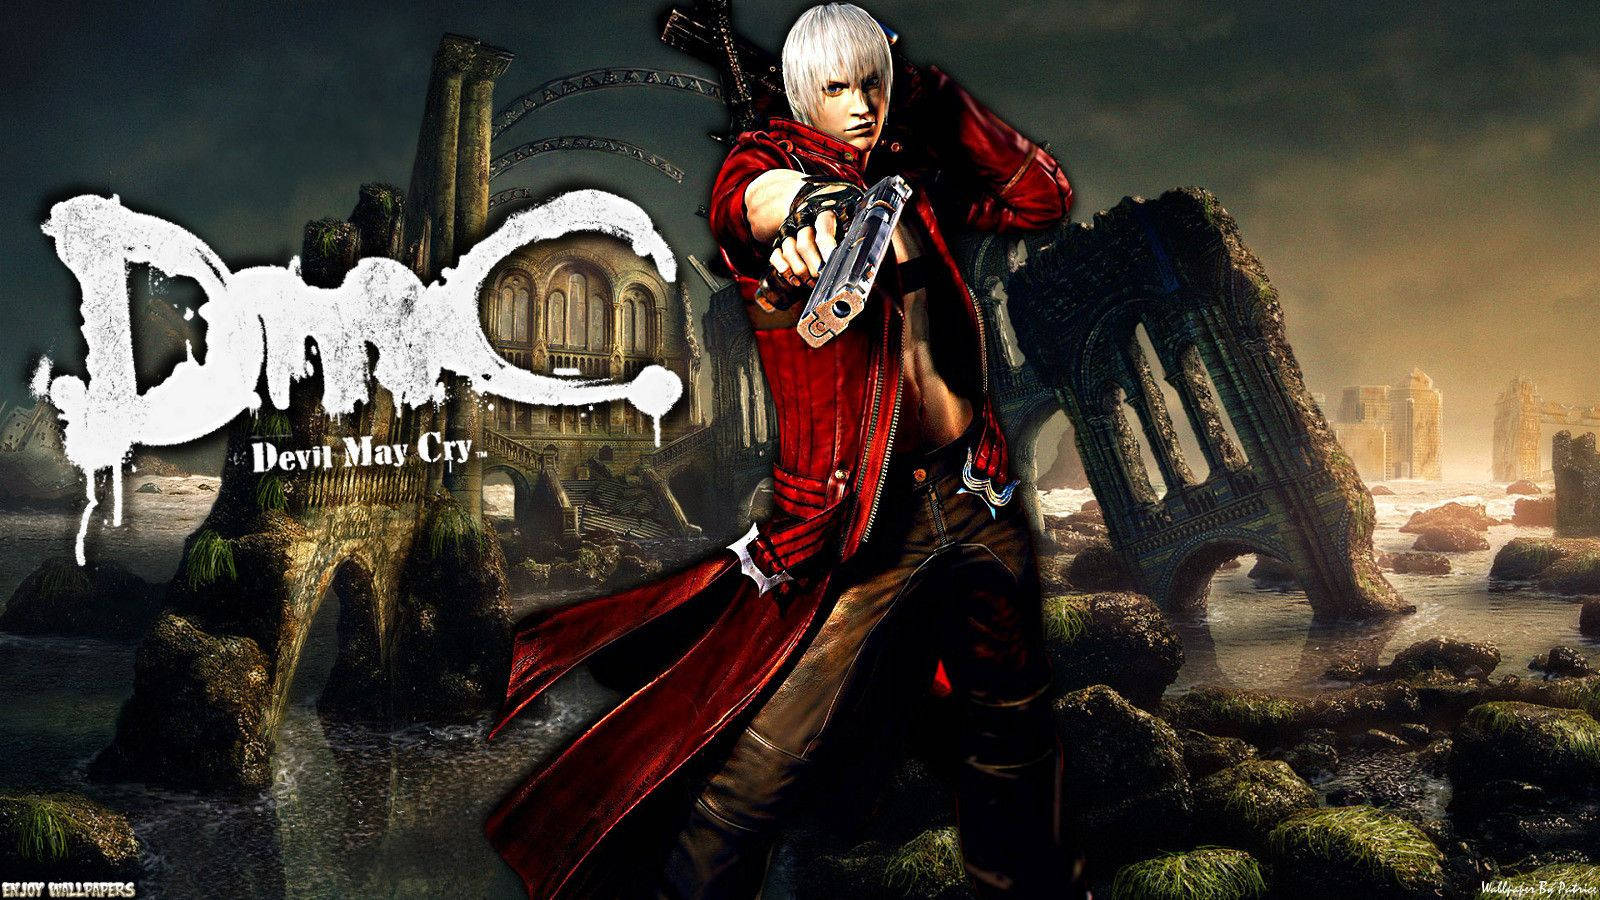 Devil May Cry Dante And Logo Poster Background